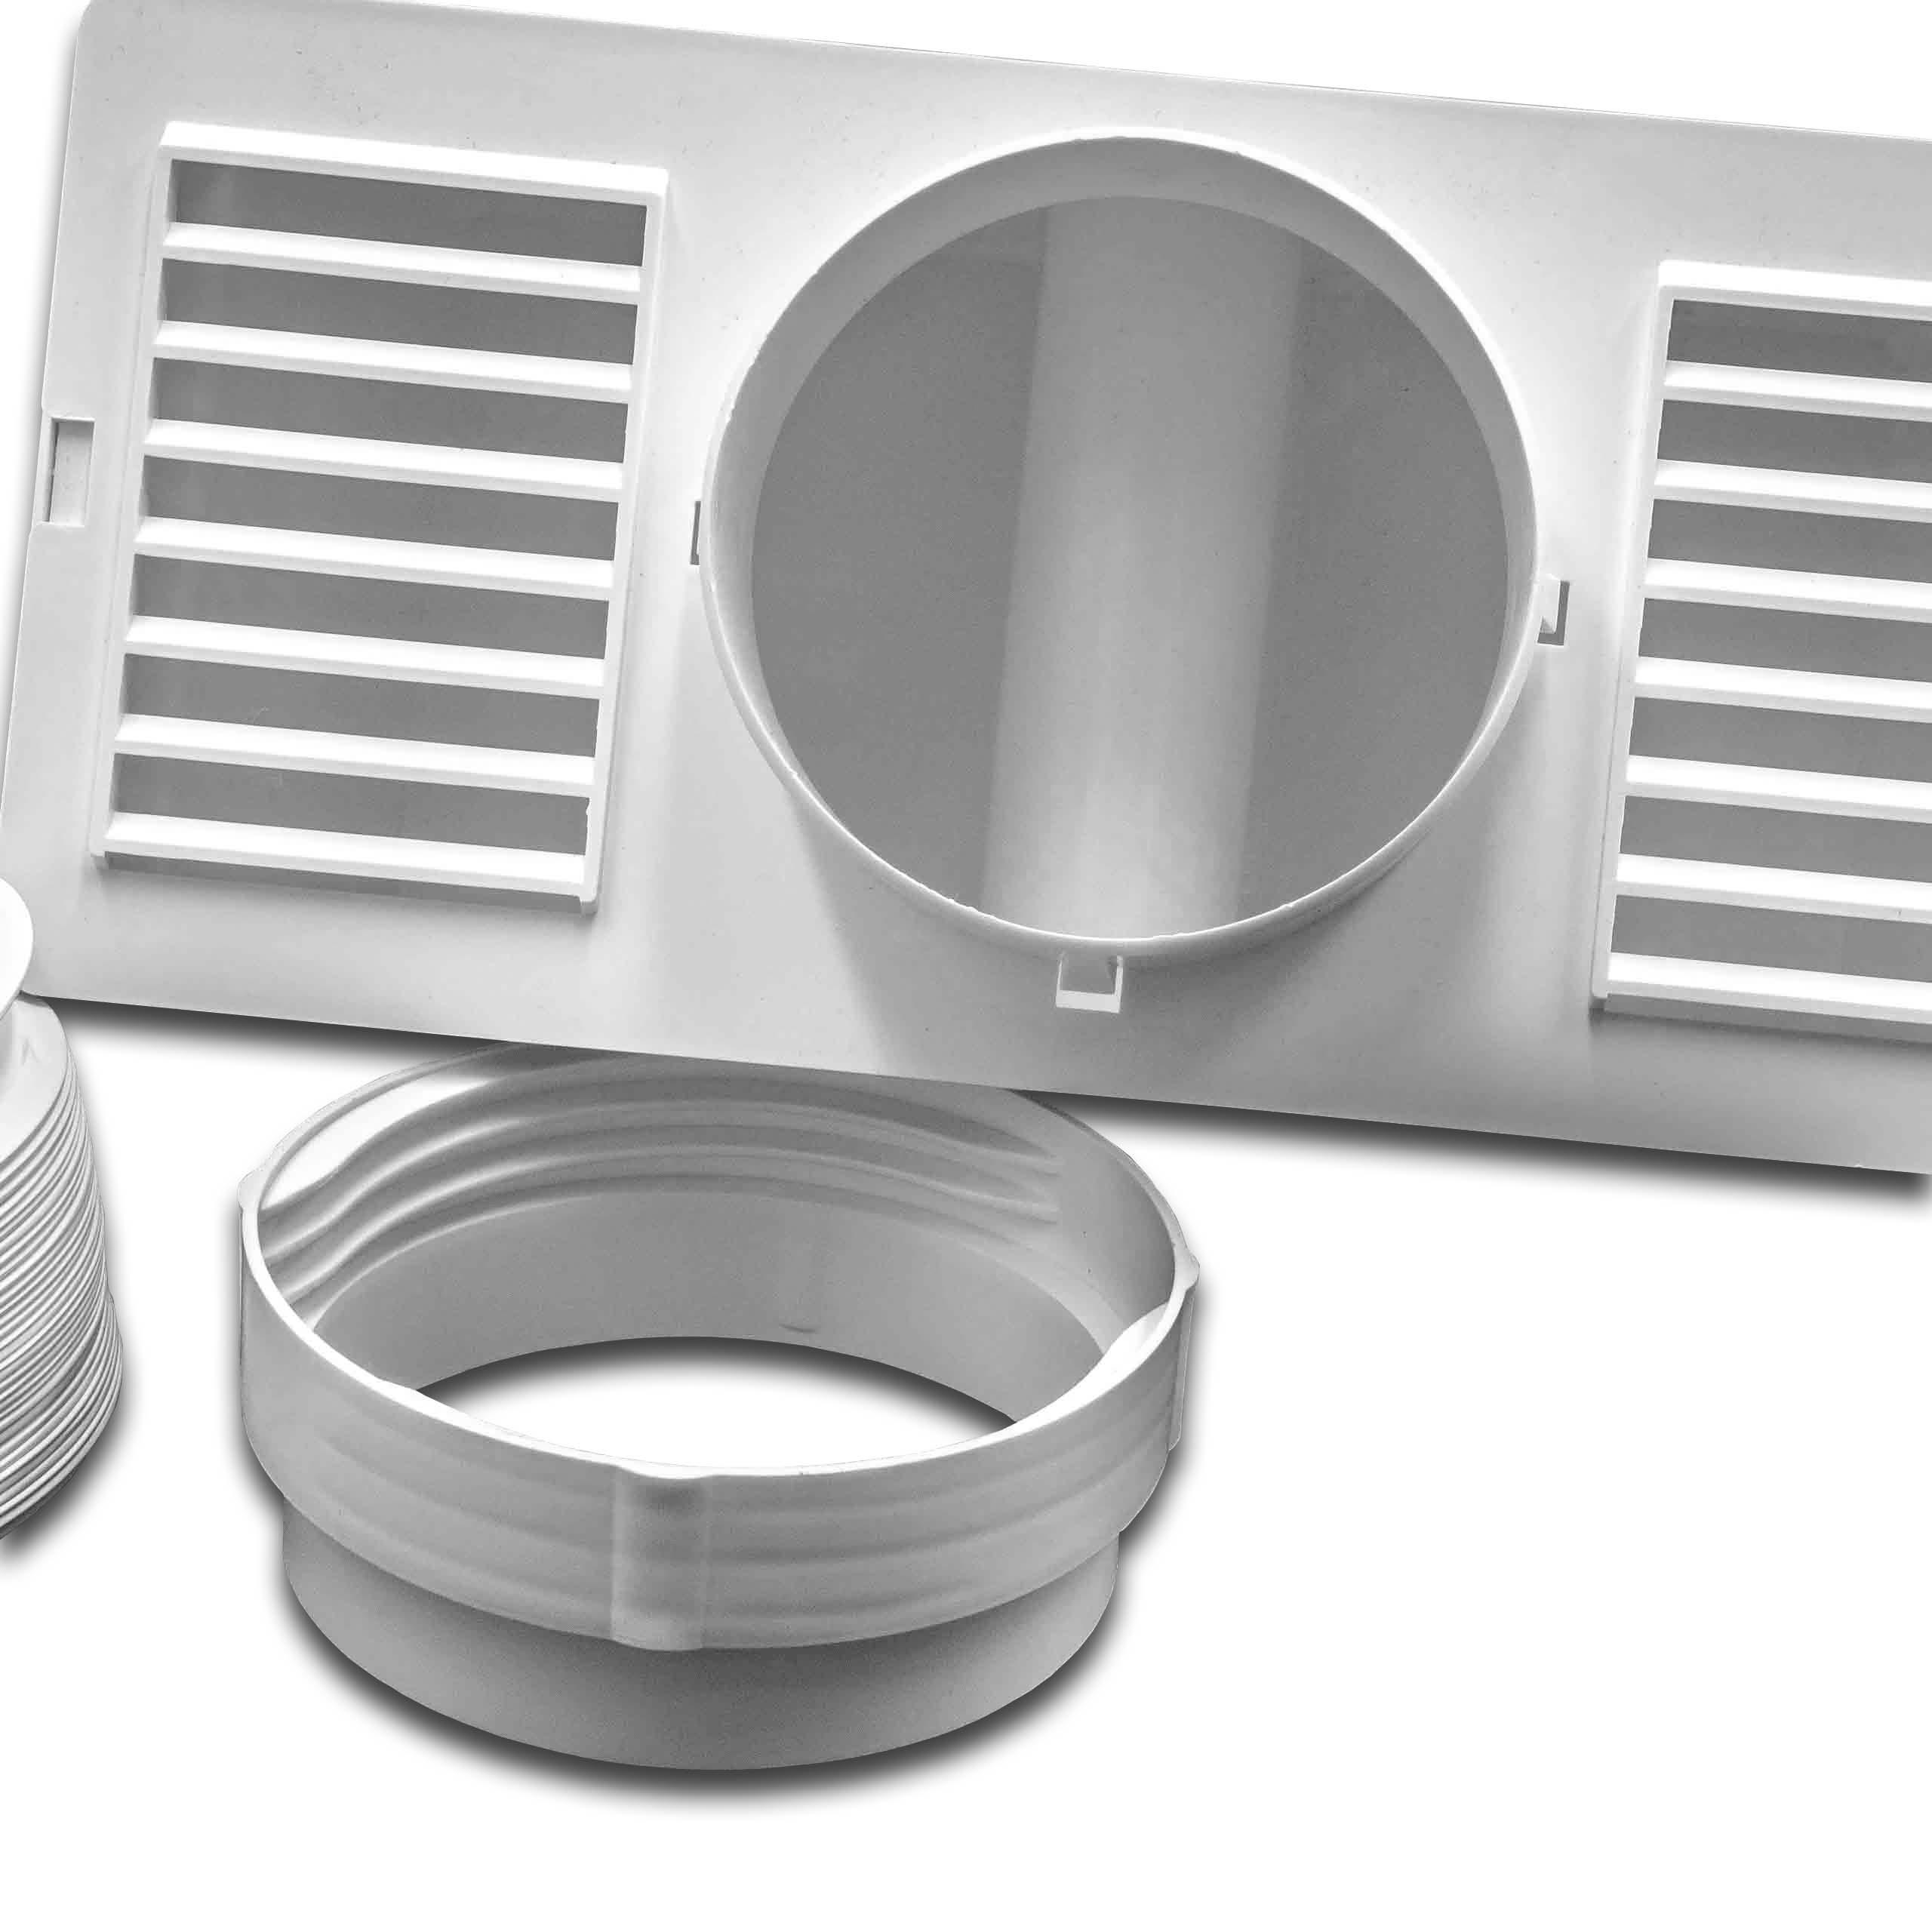 vhbw Condenser Box for Tumble Dryer - Indoor Condenser Kit with Vent Hose & Adapter White